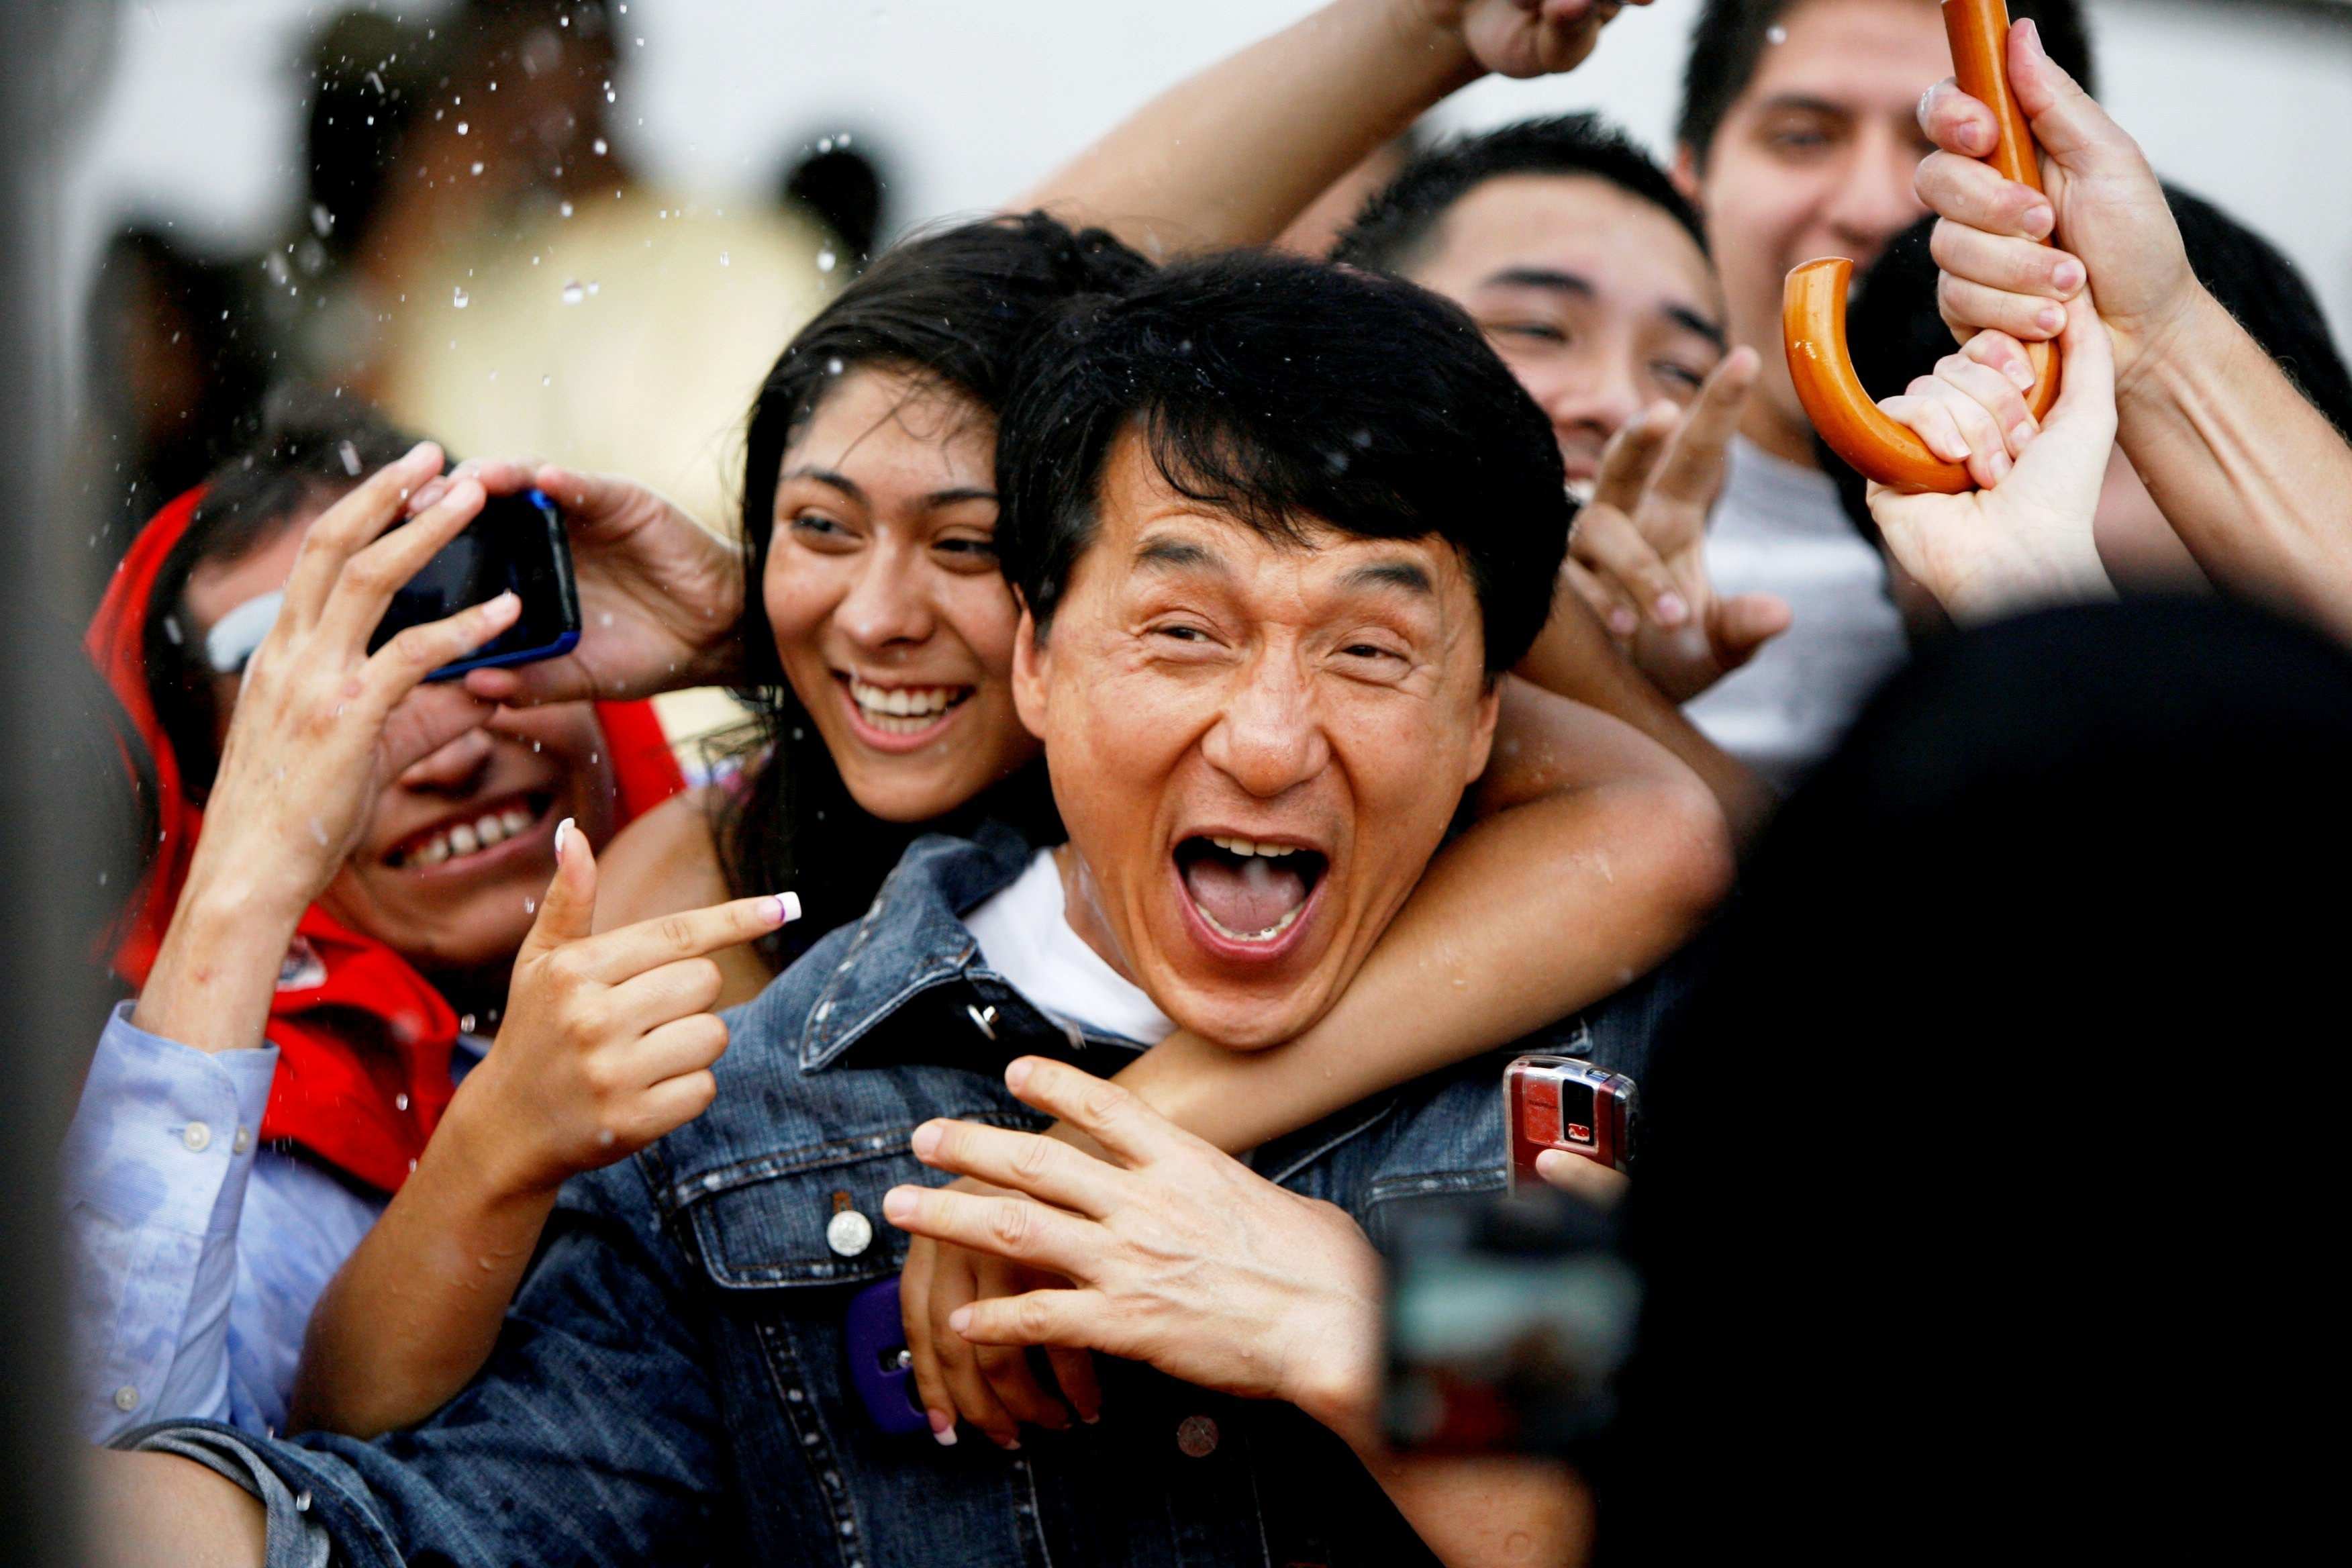 Jackie Chan getting mobbed by his fans while in India promoting a film in 2015. Chan has been known to be super friendly, always making time for fans pictures, autographs, and interactions as often as he can.